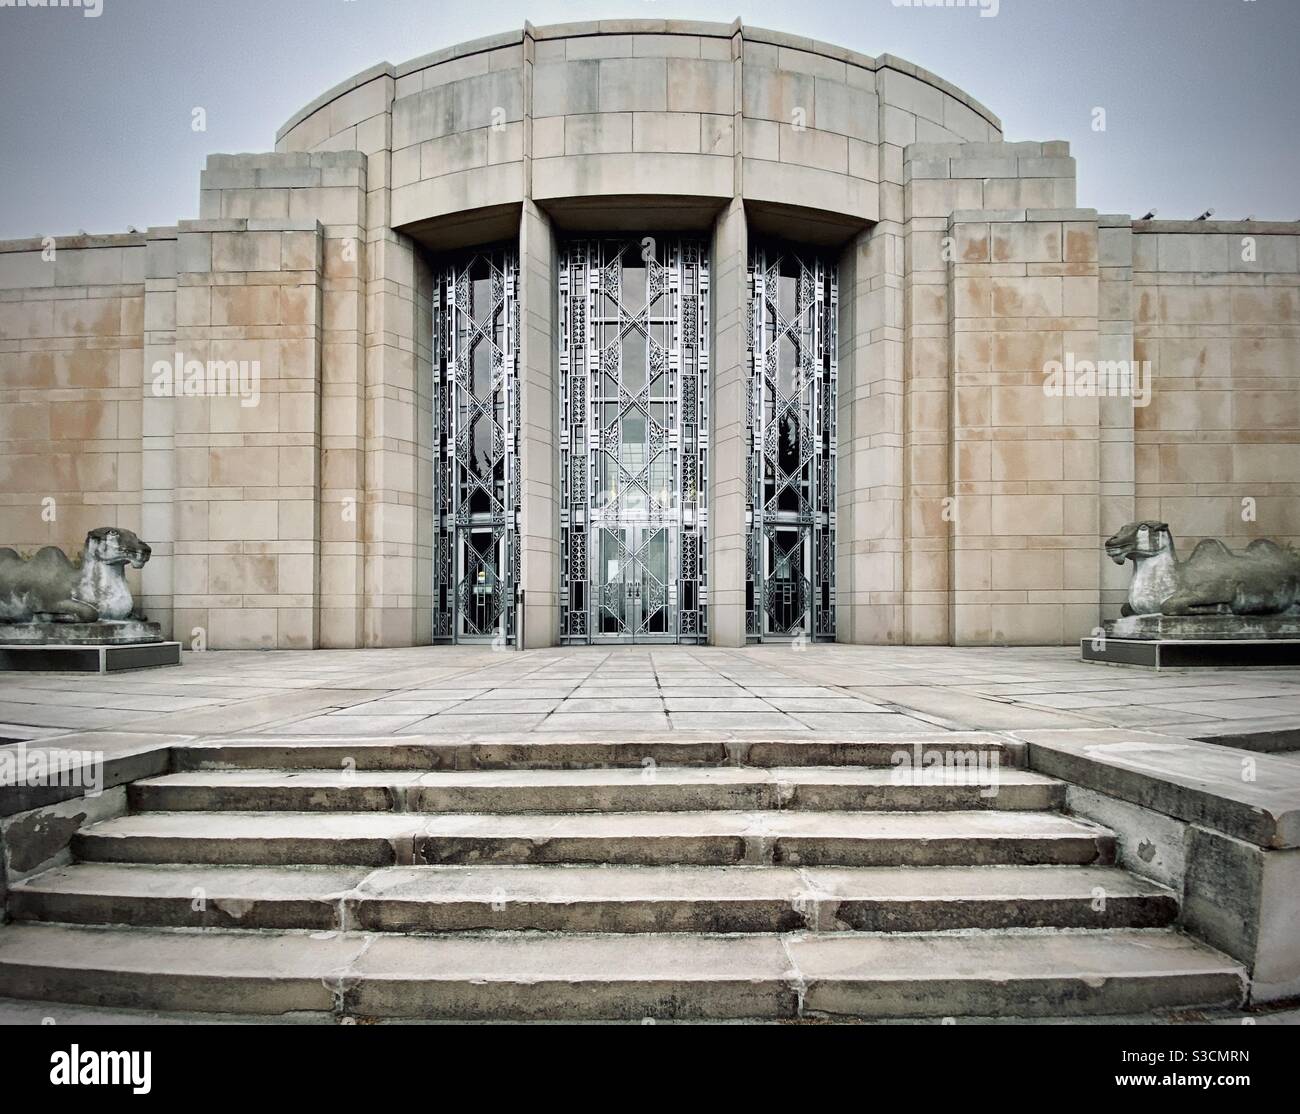 The iconic Art Deco facade of the Seattle Asian Art Museum in Volunteer Park, Seattle Stock Photo